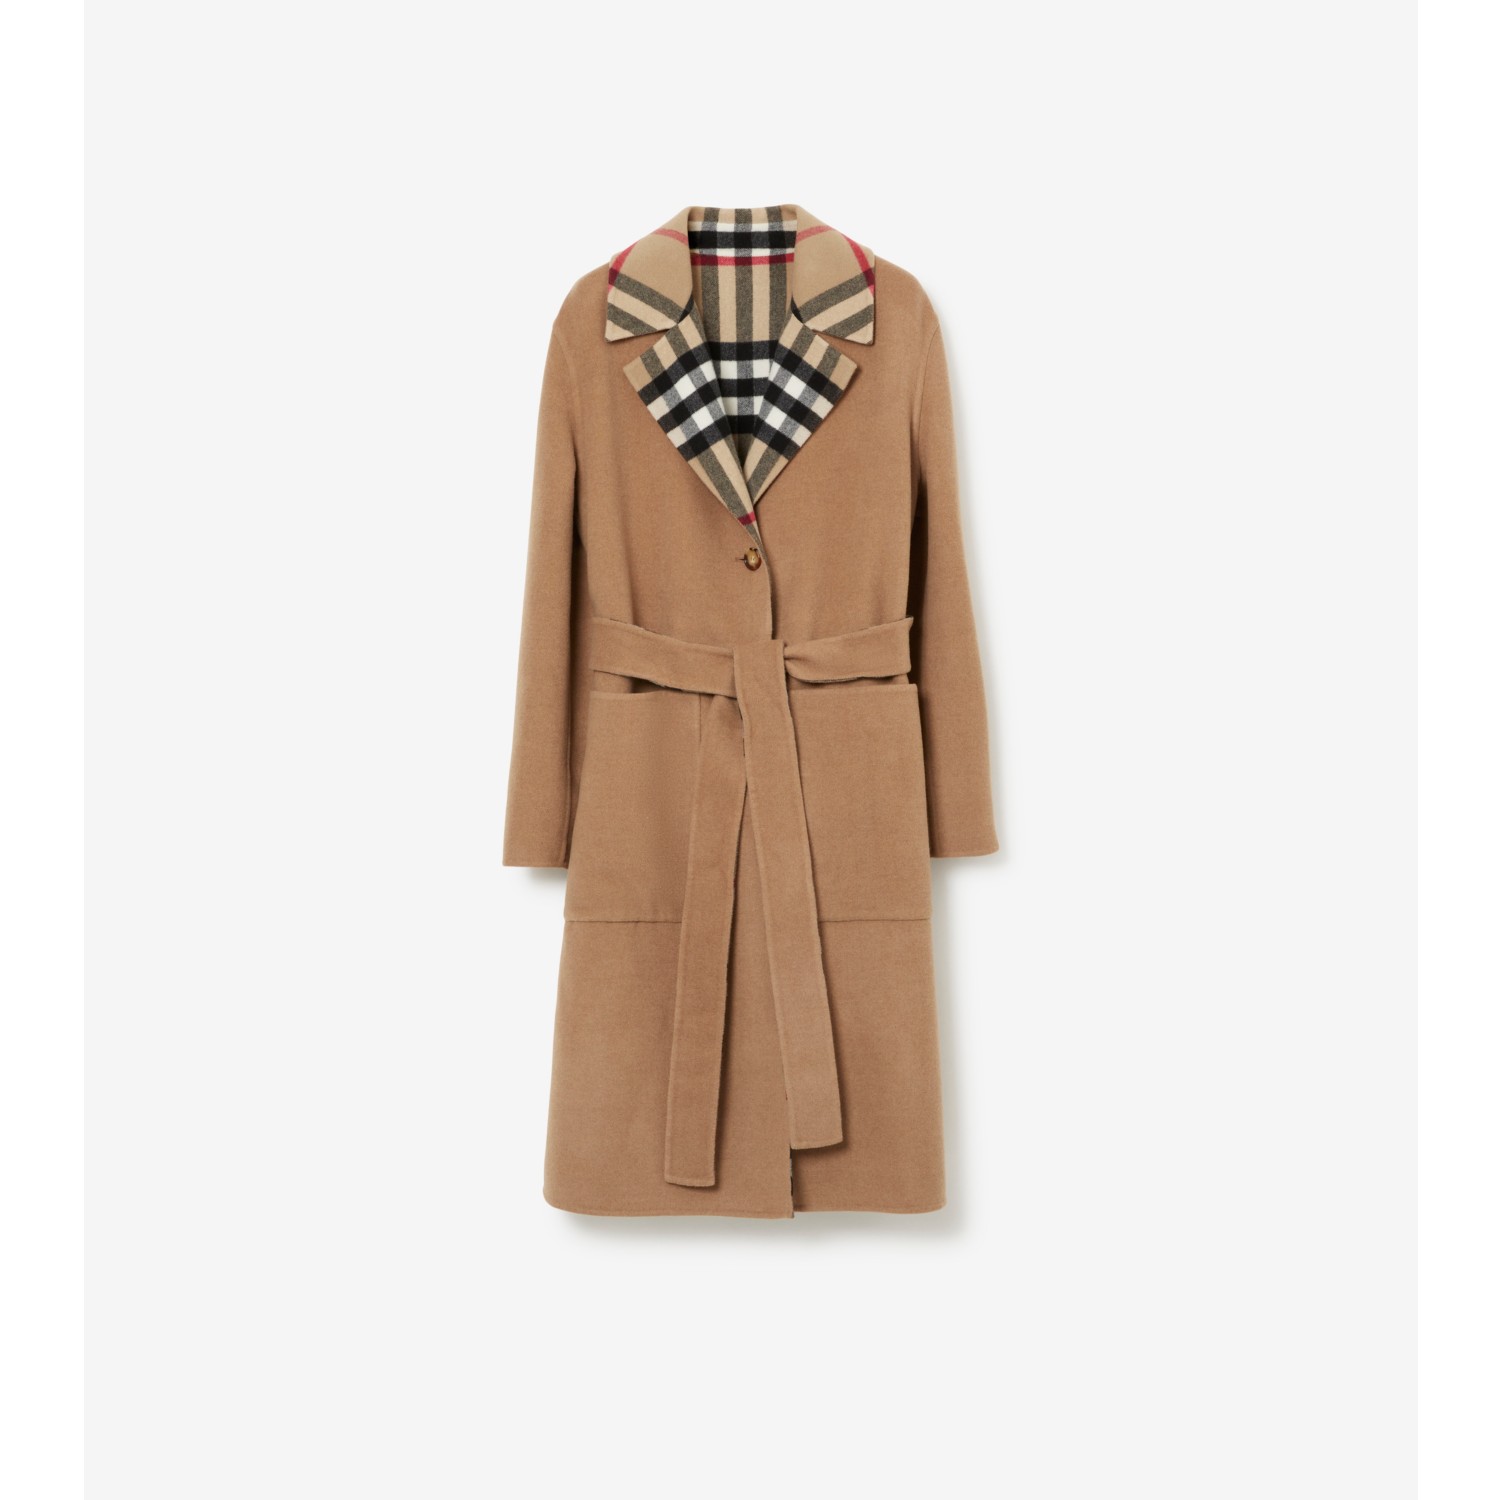 Burberry Reversible Check Double Face Wool Coat in Archive Beige CHK